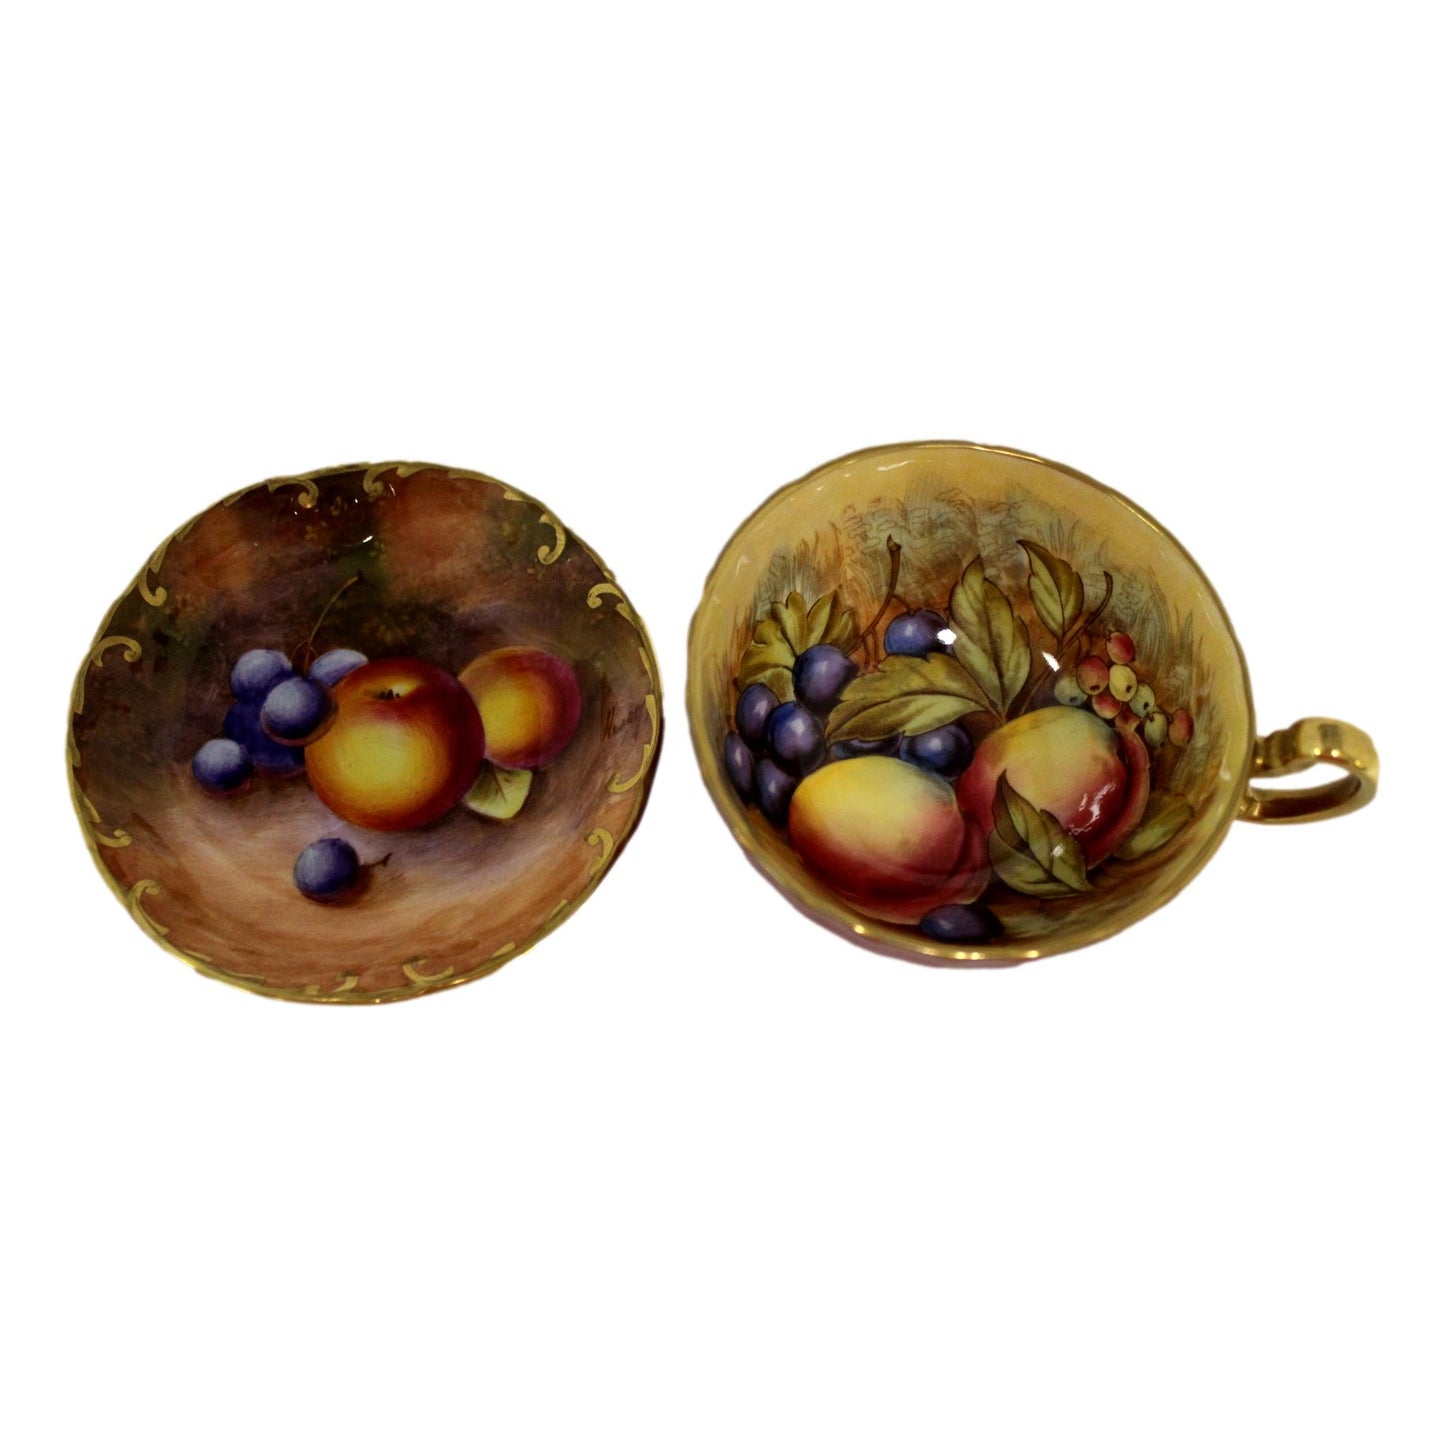 Aynsley Fruit and Berries Cup & Saucer